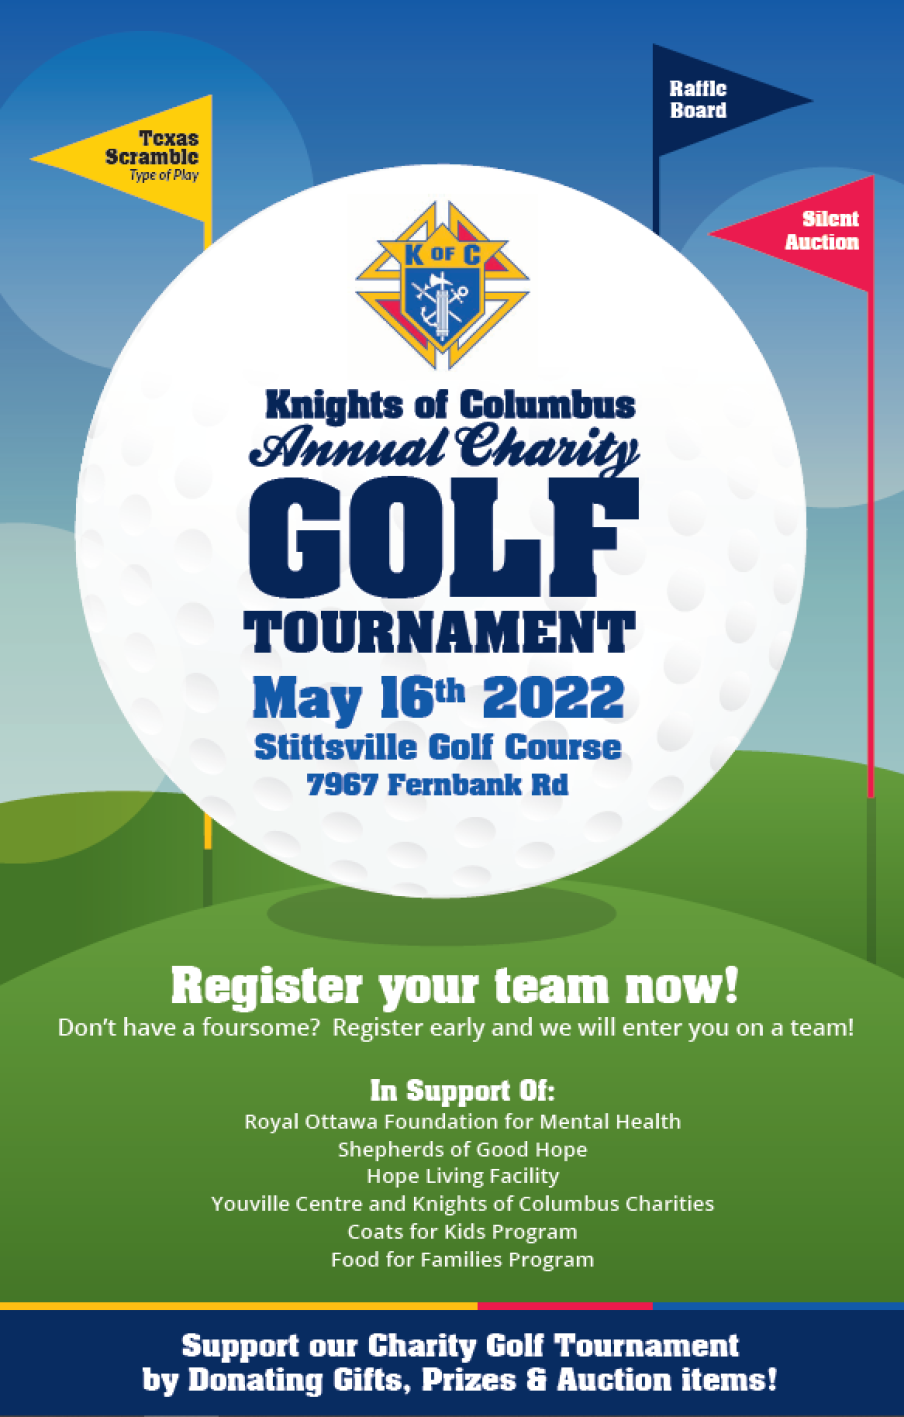 Knights of Columbus Annual Charity Golf Tournament The Royal